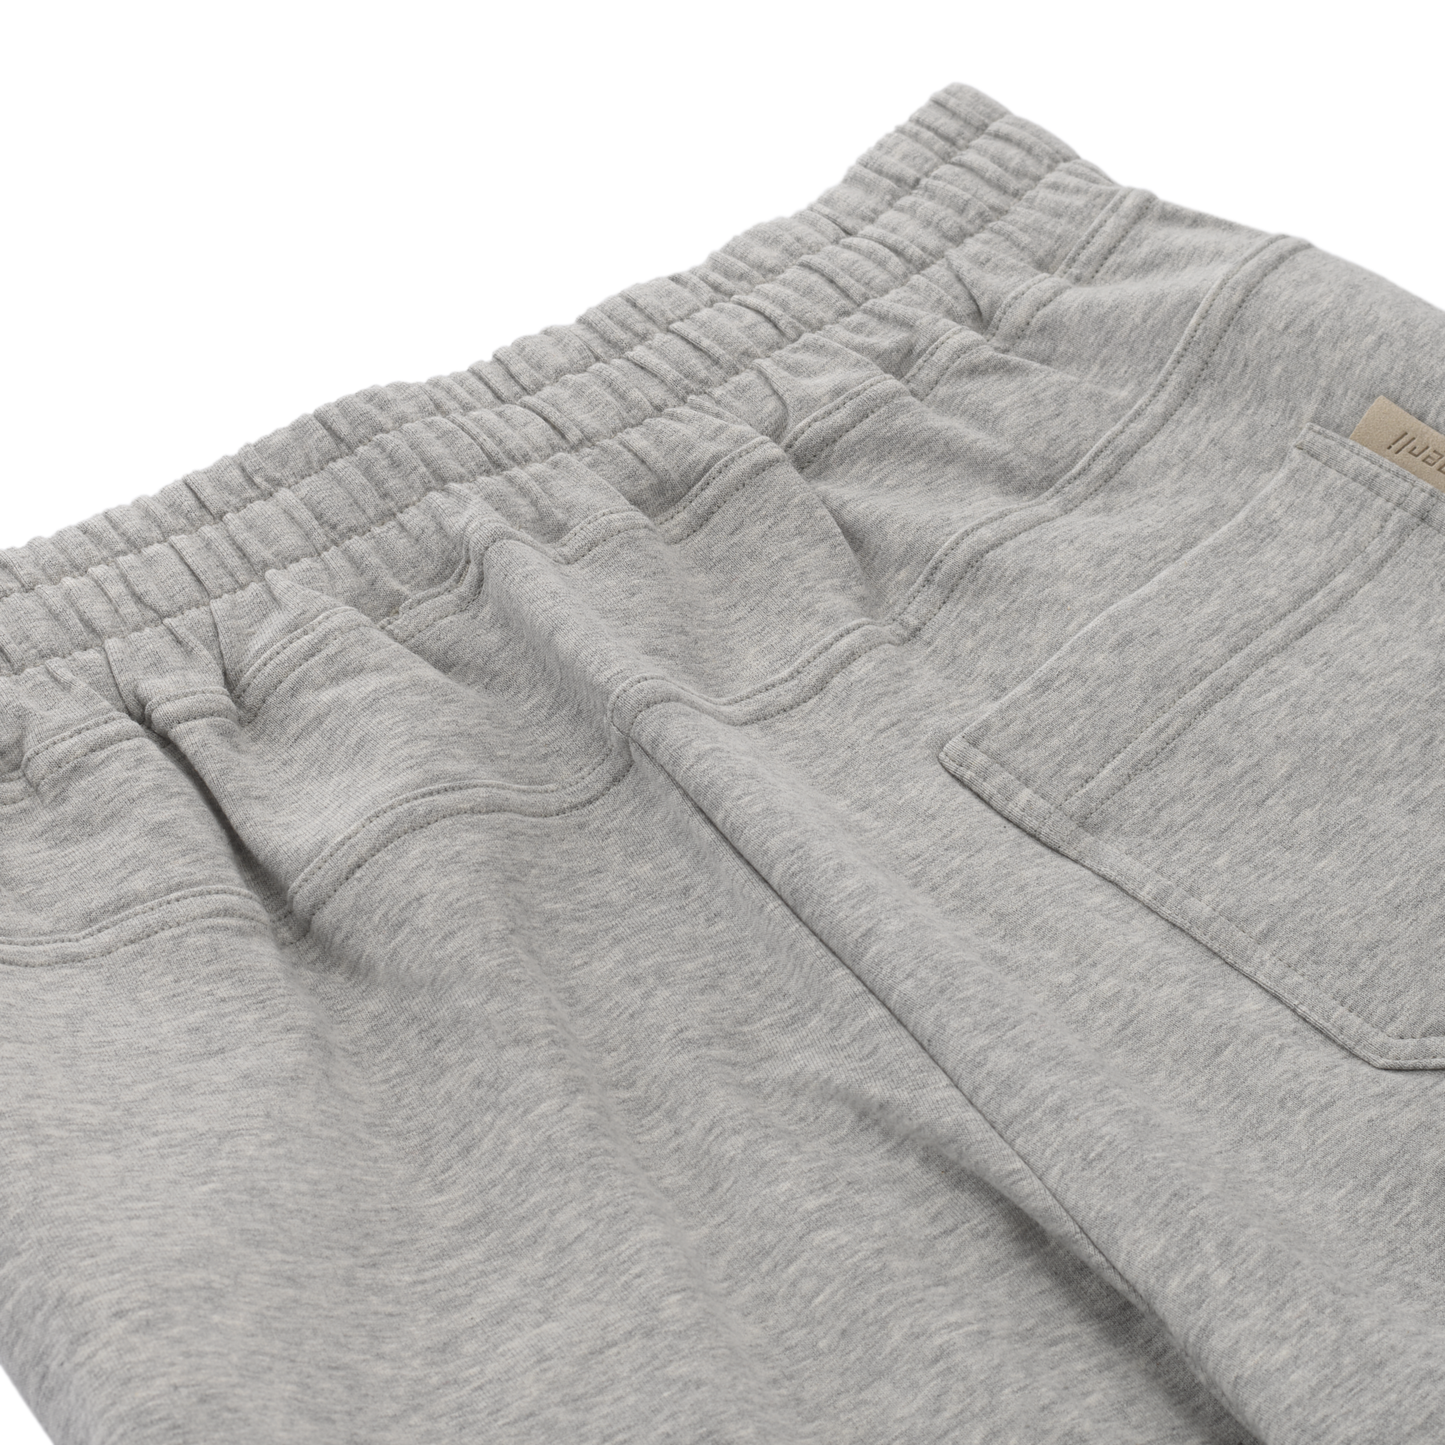 Drawstring Cotton Home Trousers in Light Grey